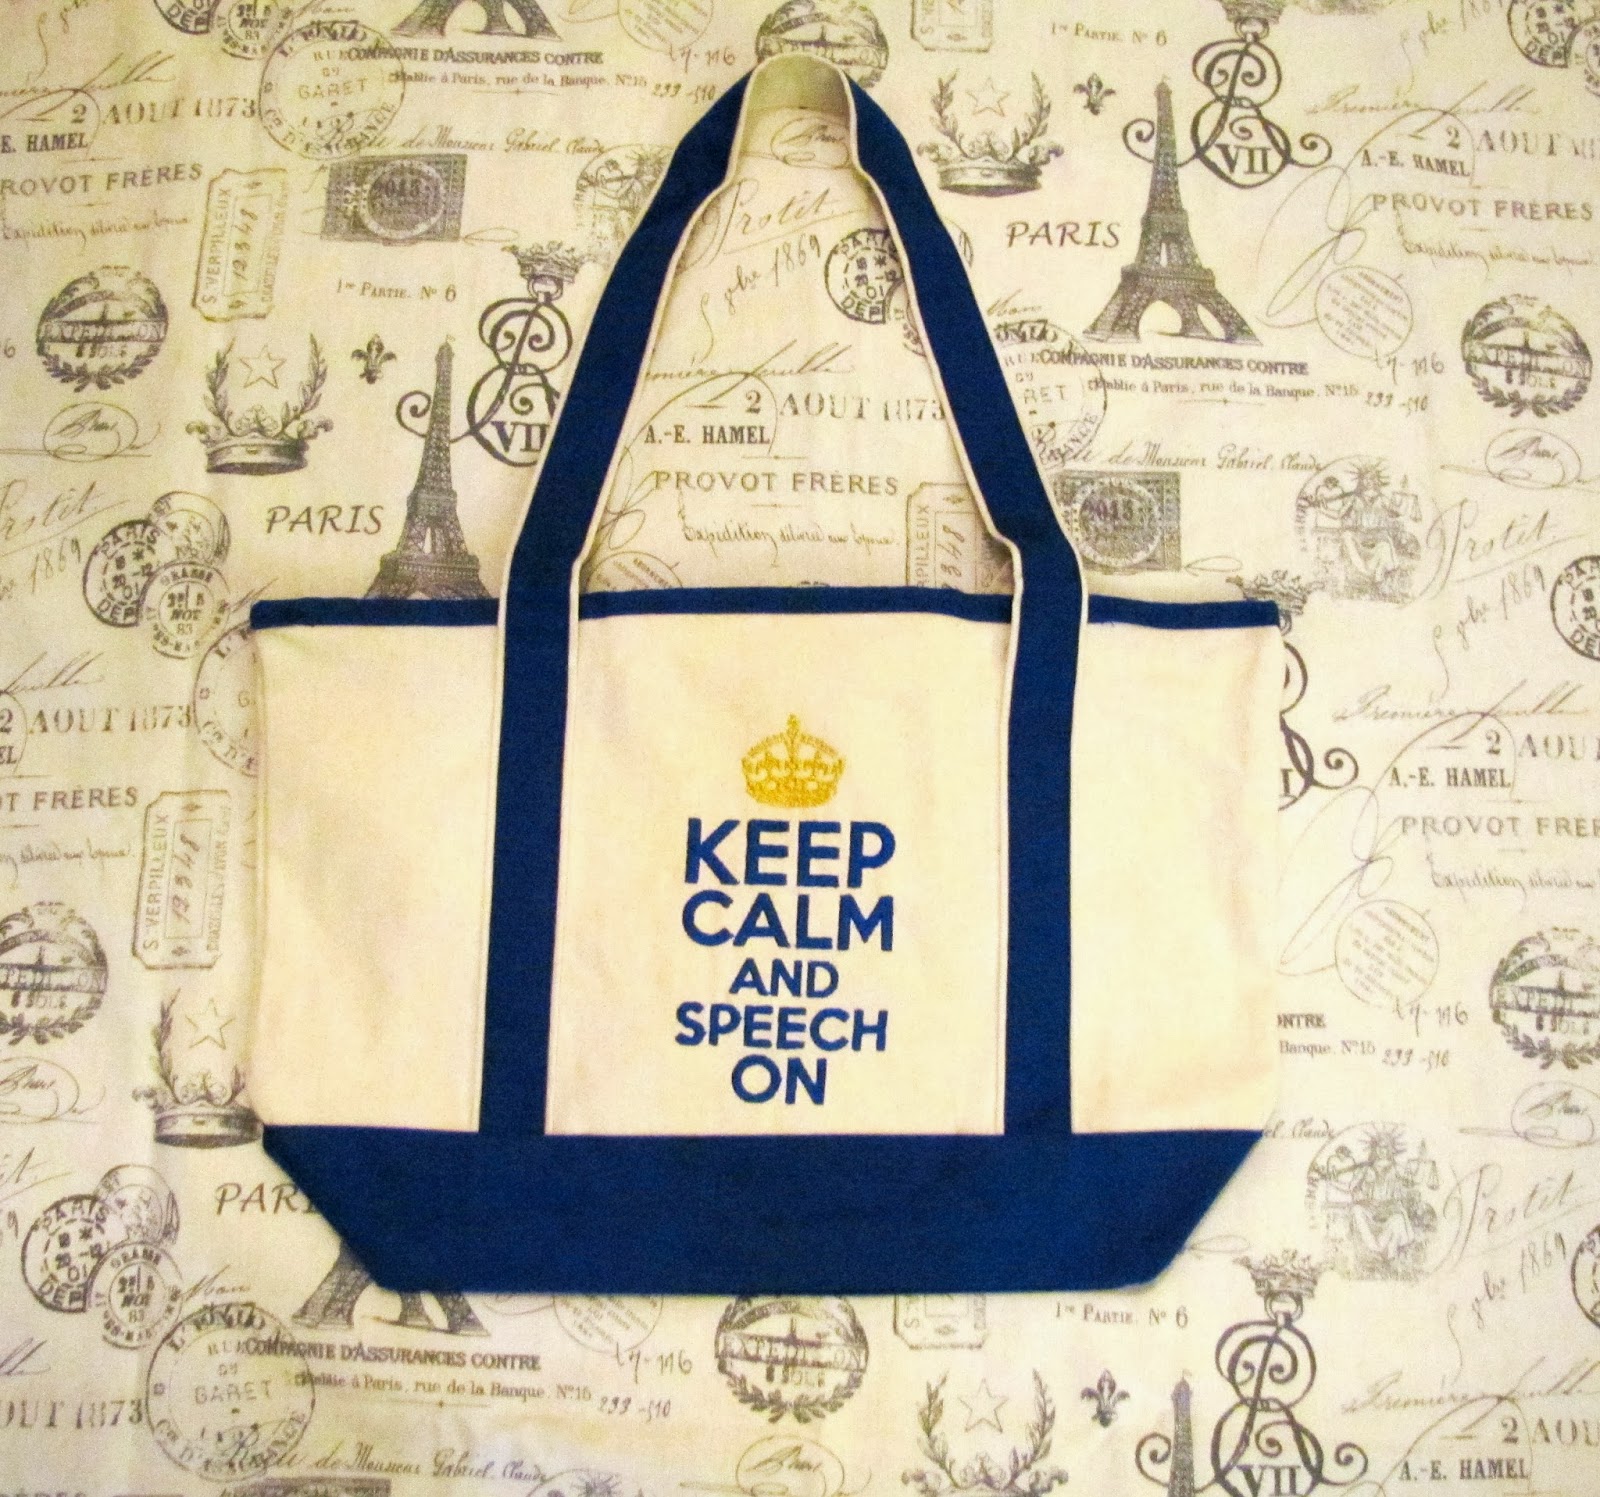 https://www.etsy.com/listing/161372692/keep-calm-and-carry-on-large-heavy-duty?ref=shop_home_active_2